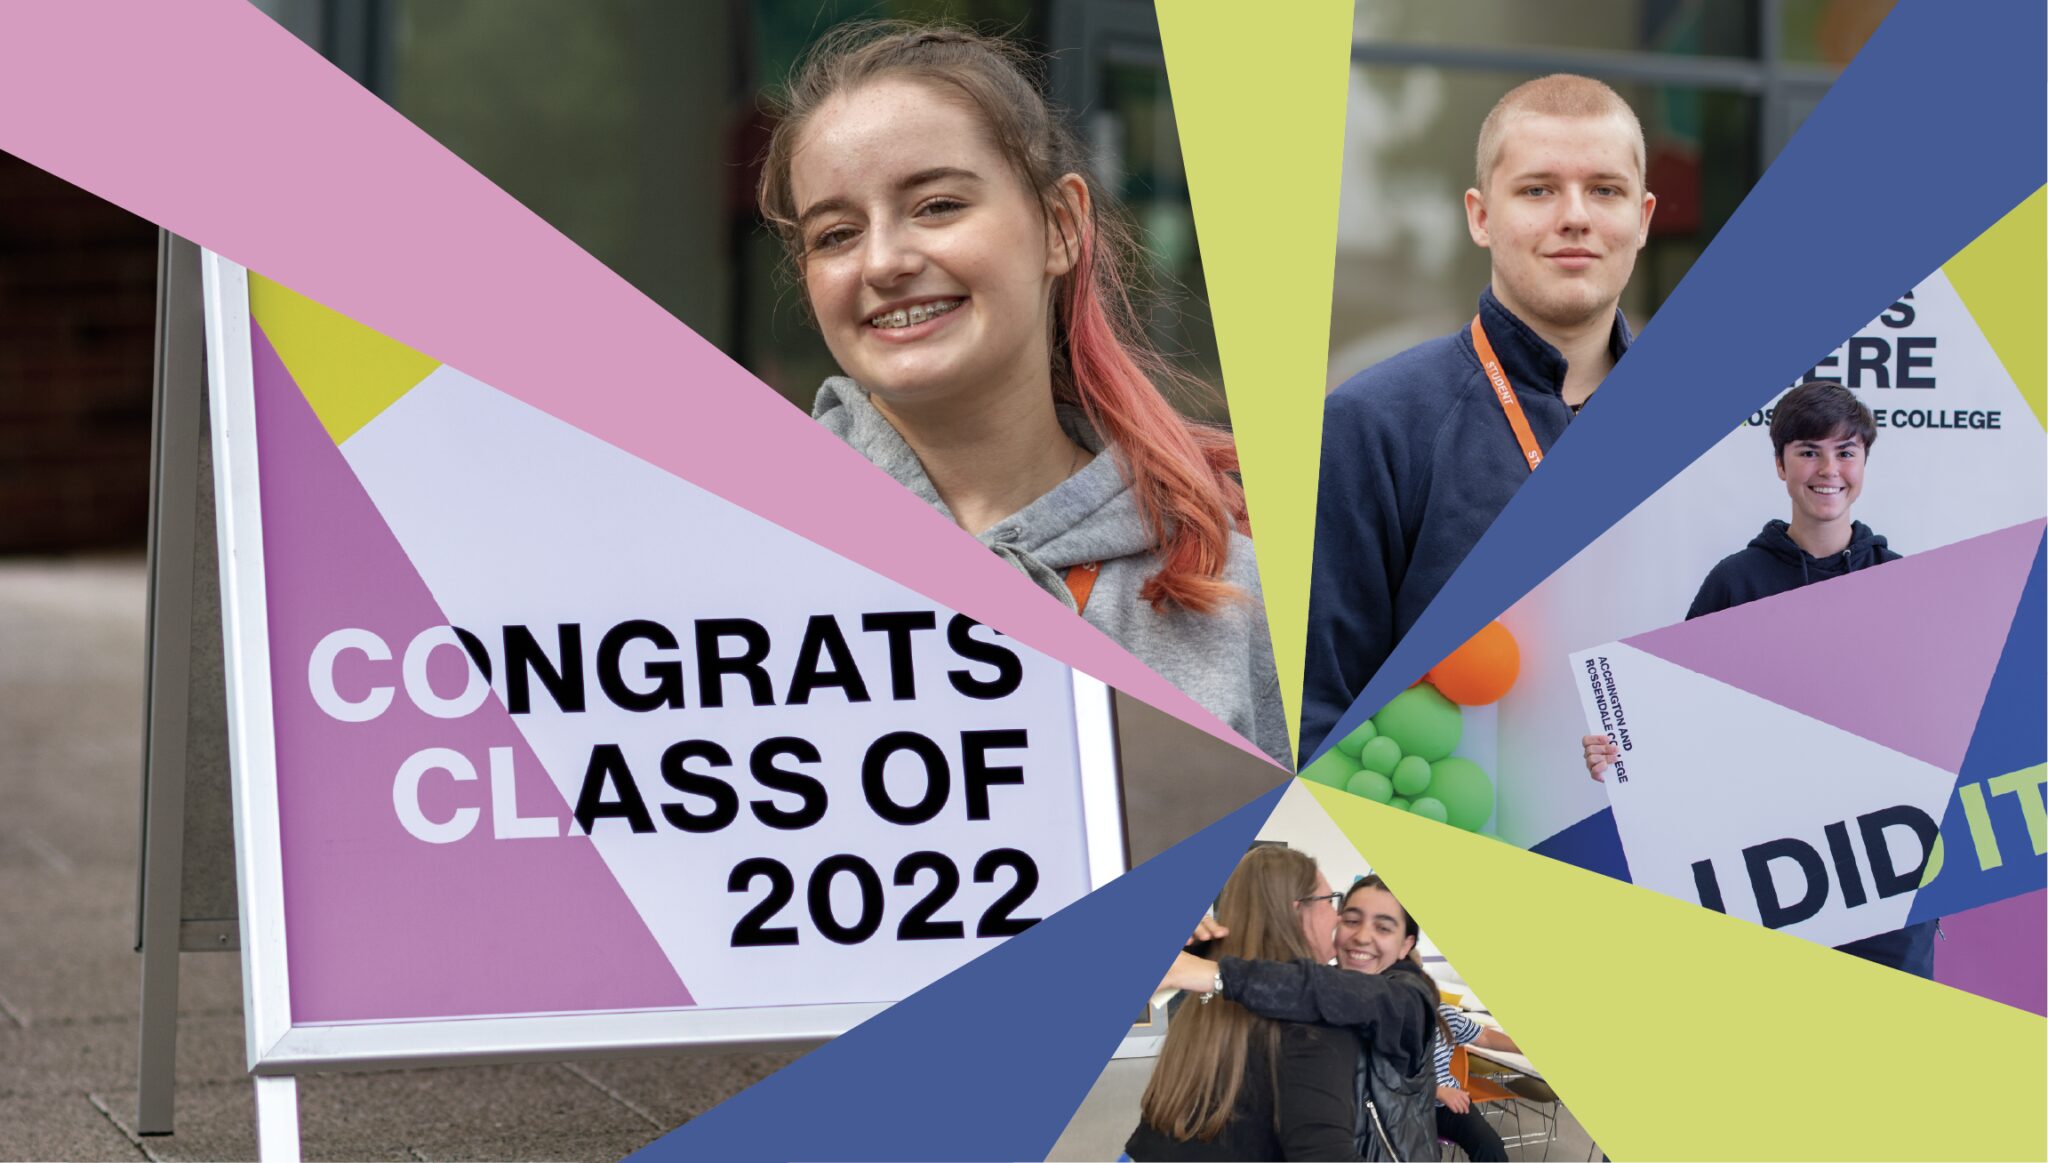 Accrington & Rossendale Results Day 2022